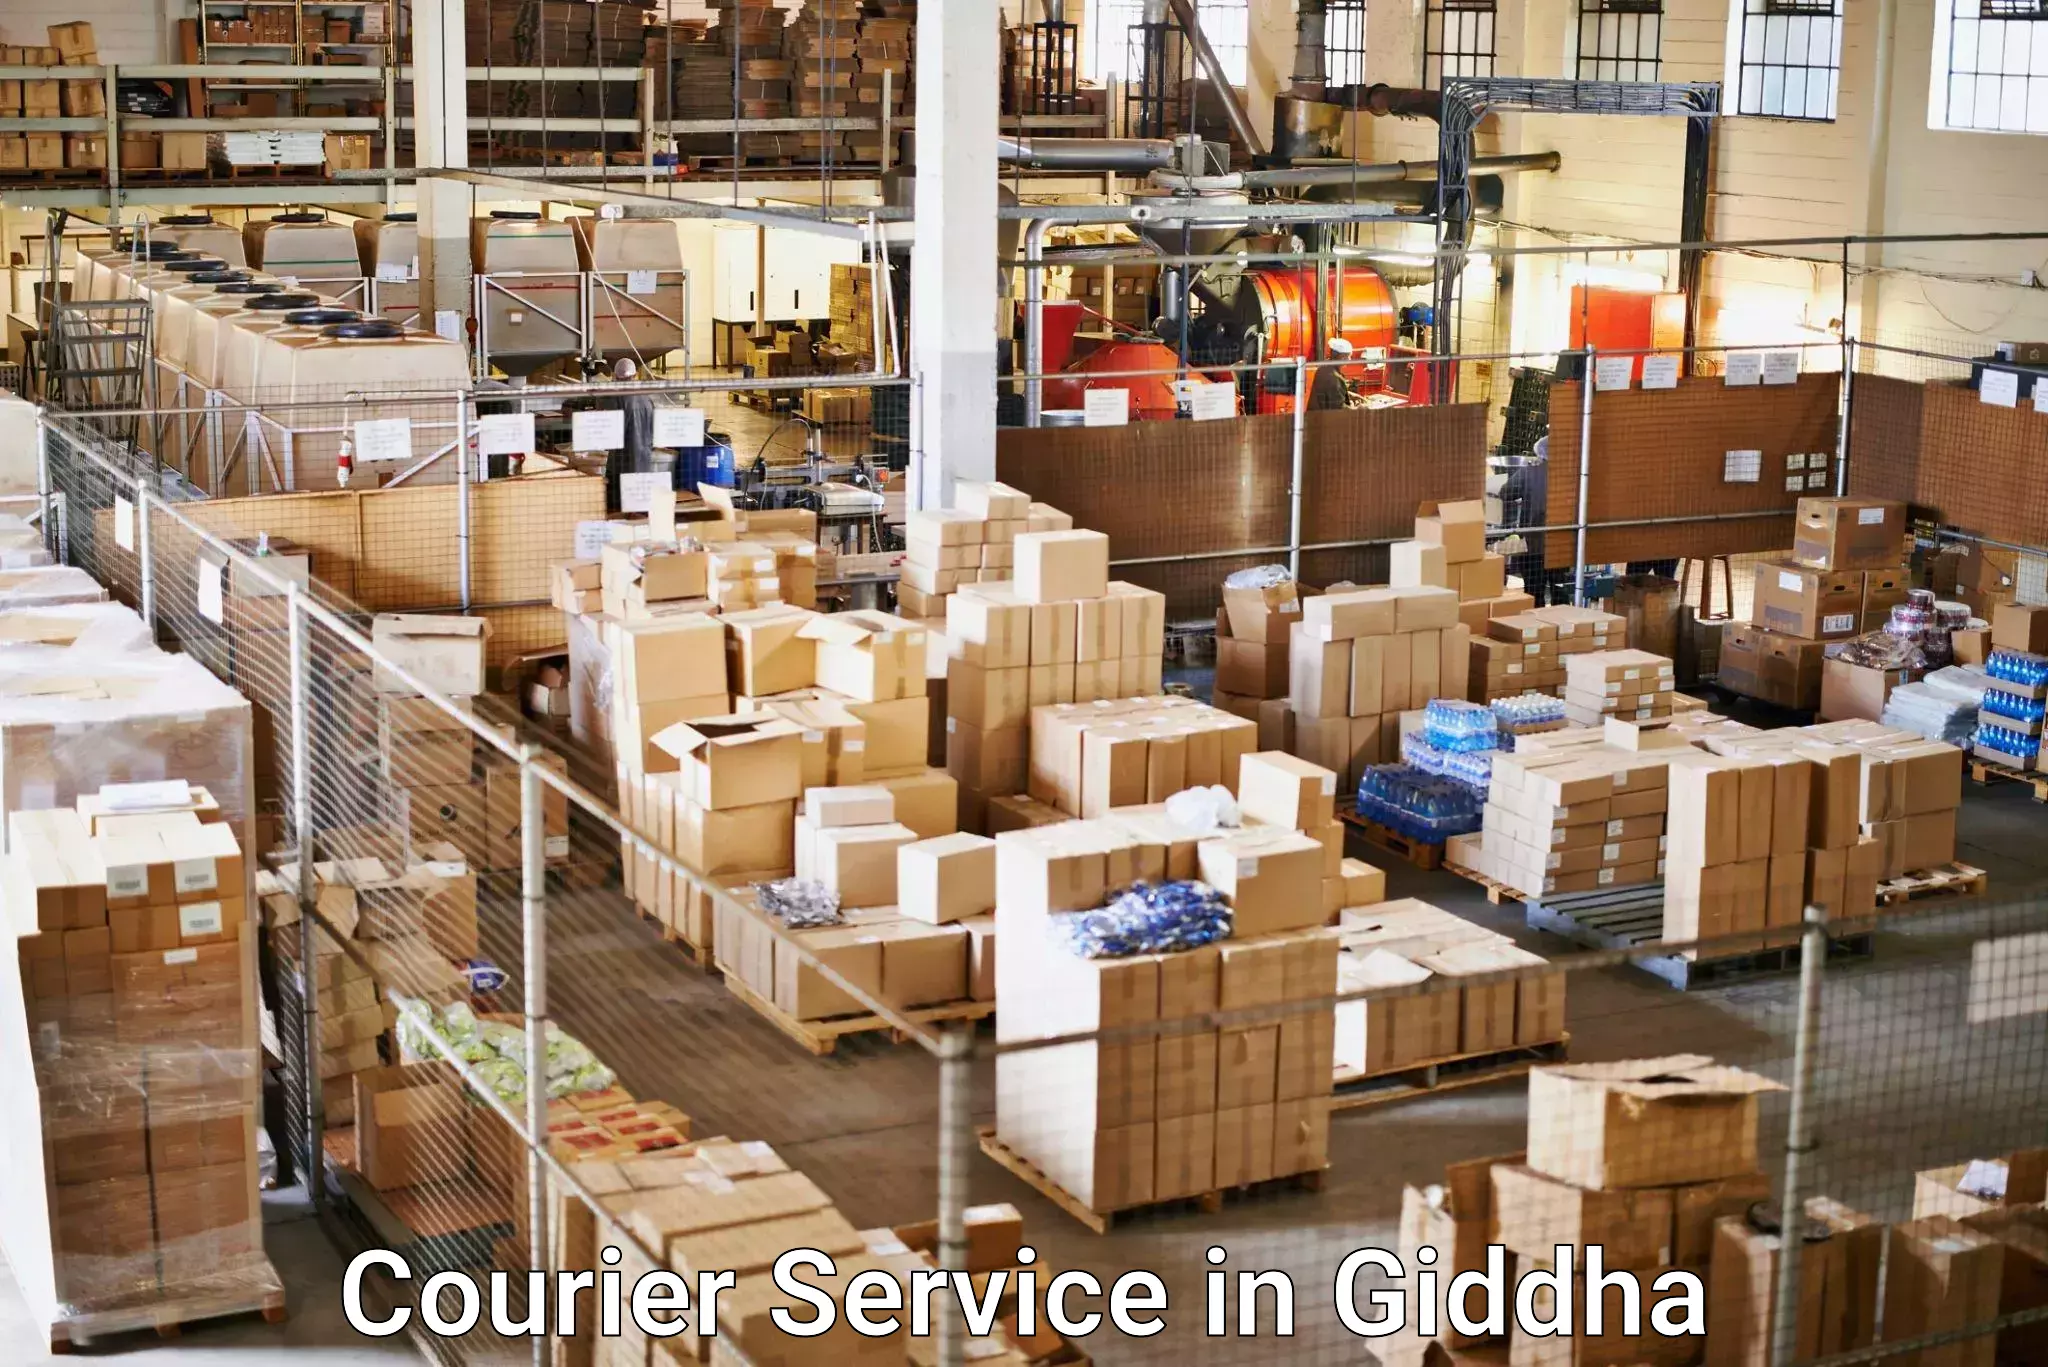 Advanced package delivery in Giddha